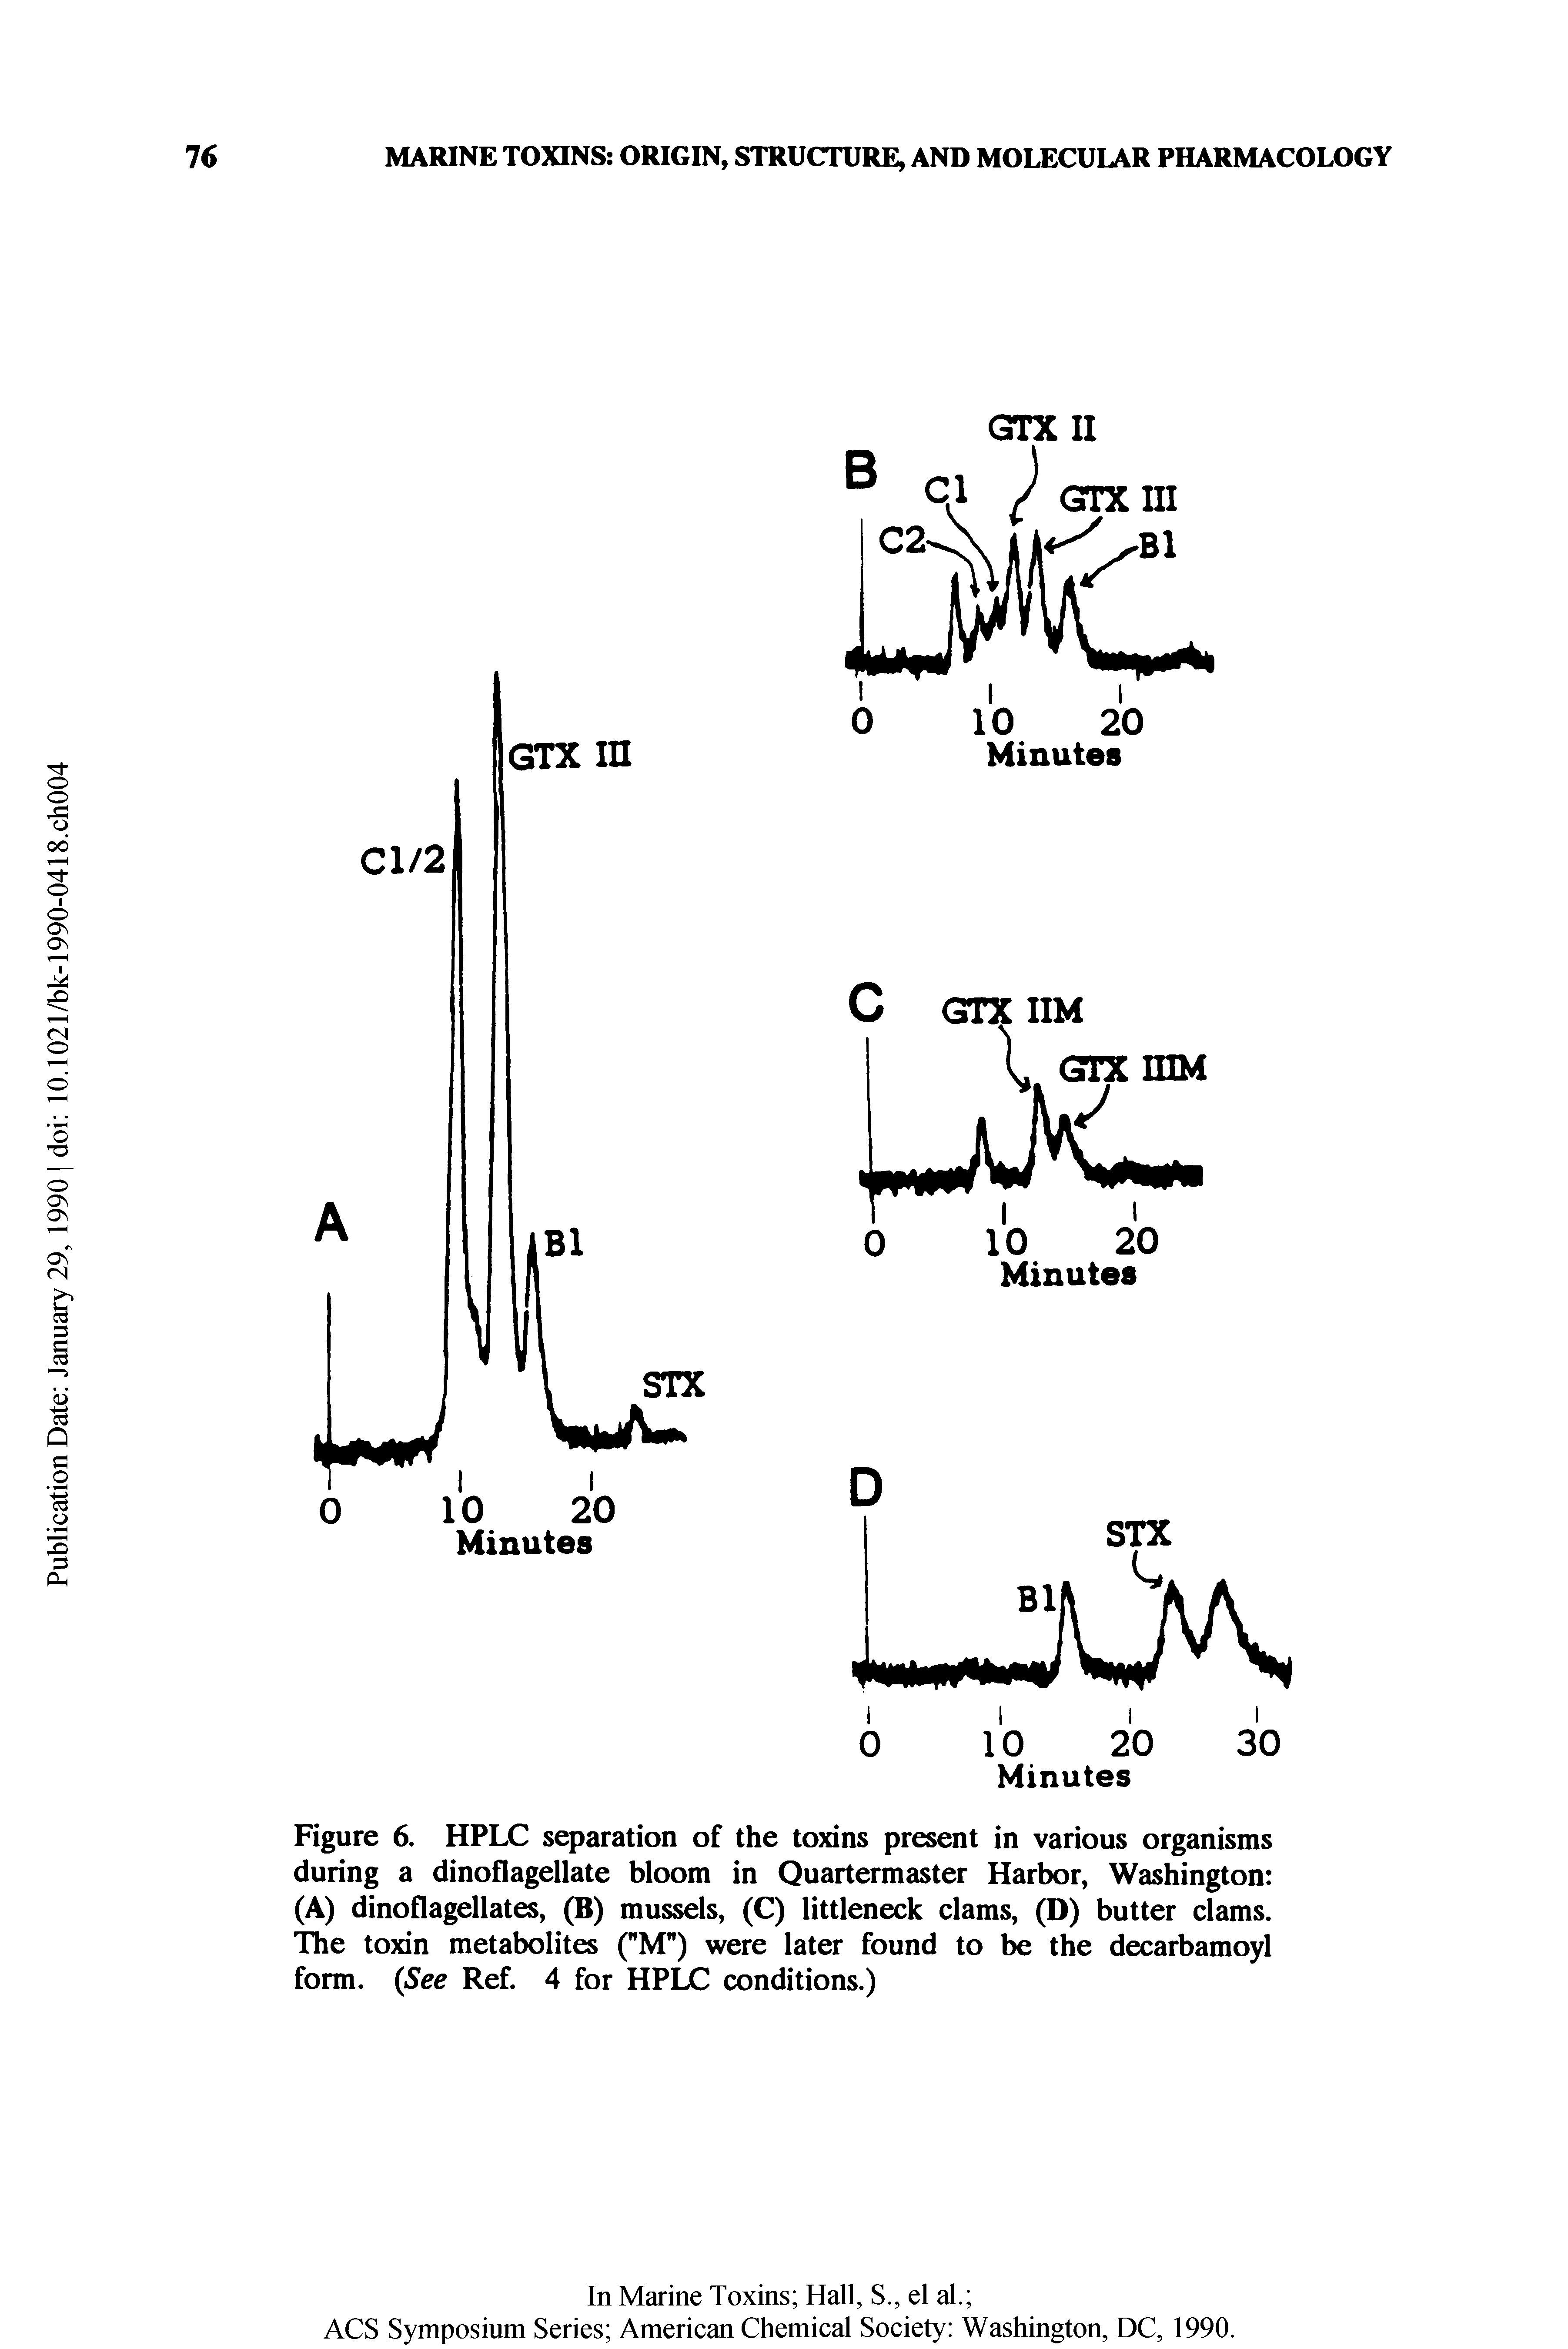 Figure 6. HPLC separation of the toxins present in various organisms during a dinoflagellate bloom in Quartermaster Harbor, Washington (A) dinoflagellates, (B) mussels, (C) littleneck clams, (D) butter clams. The toxin metabolites ("M") were later found to be the decarbamoyl form. See Ref. 4 for HPLC conditions.)...